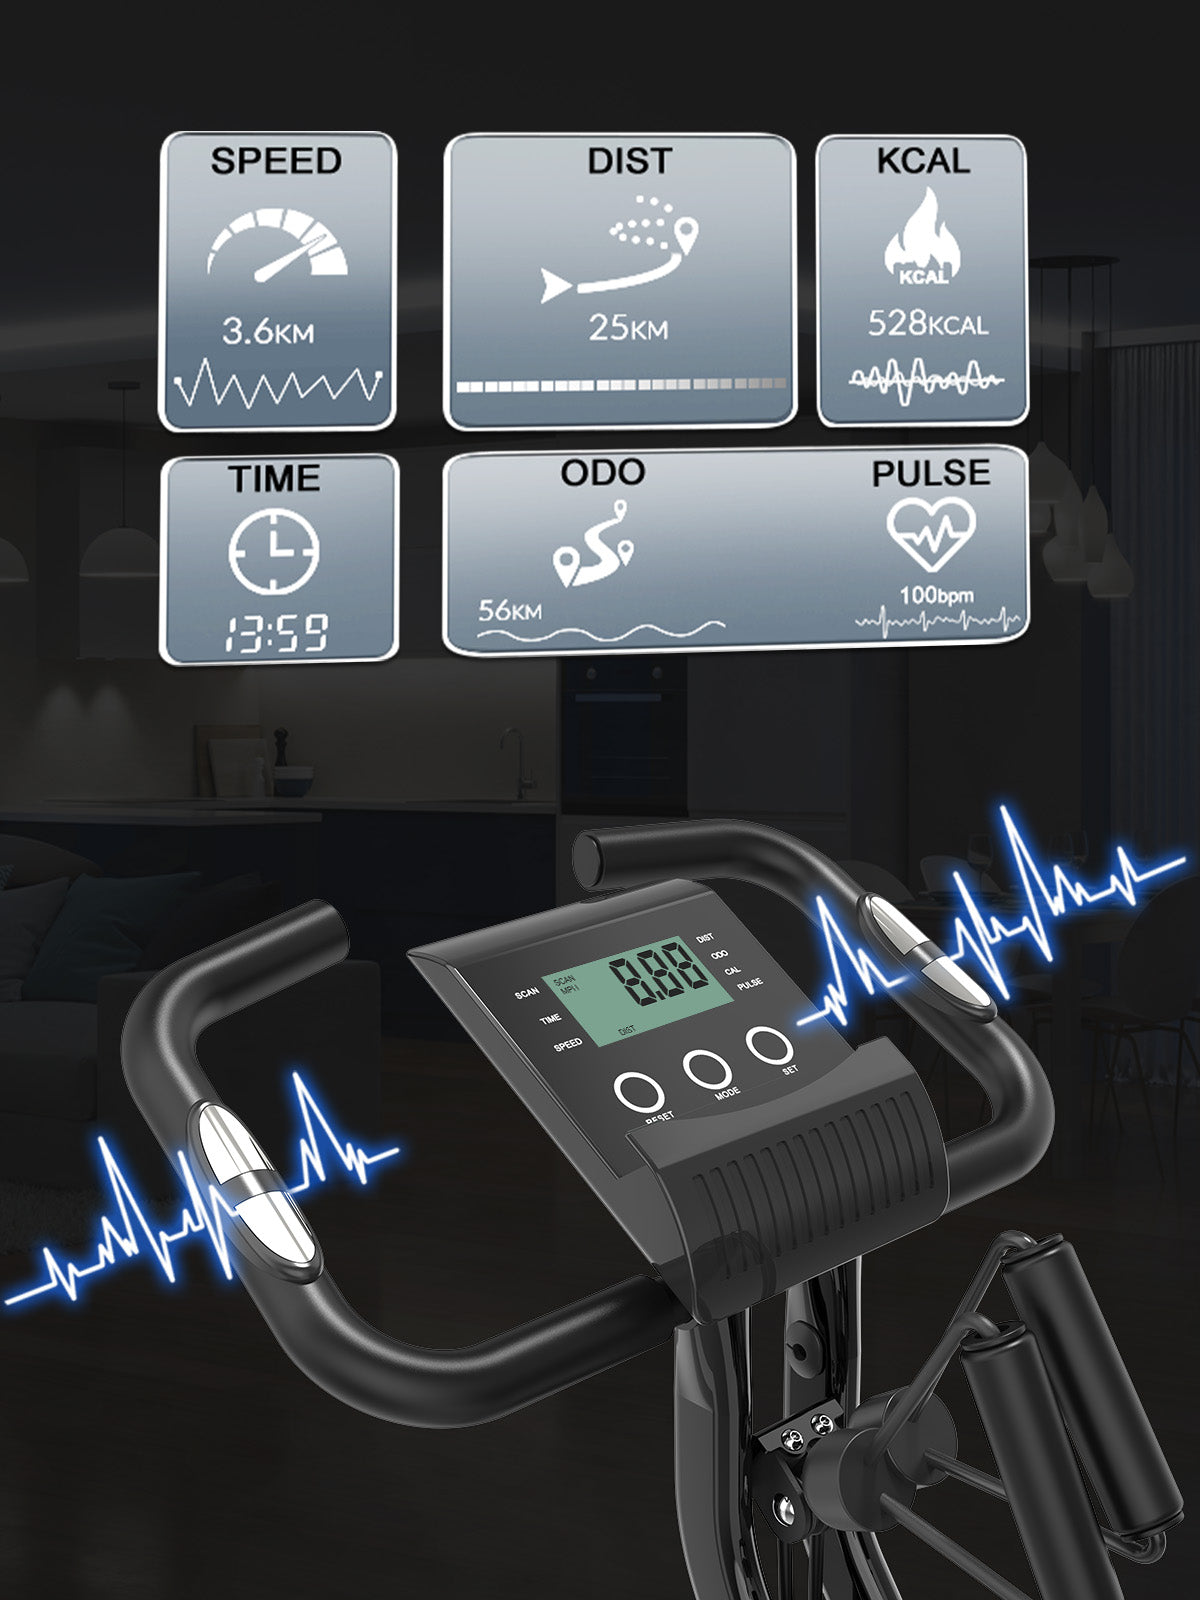 Monitor Workout Data in Real Time With the phone/iPad holder, you can do sports and listen to musicat the same time, which makes it easier to train further.